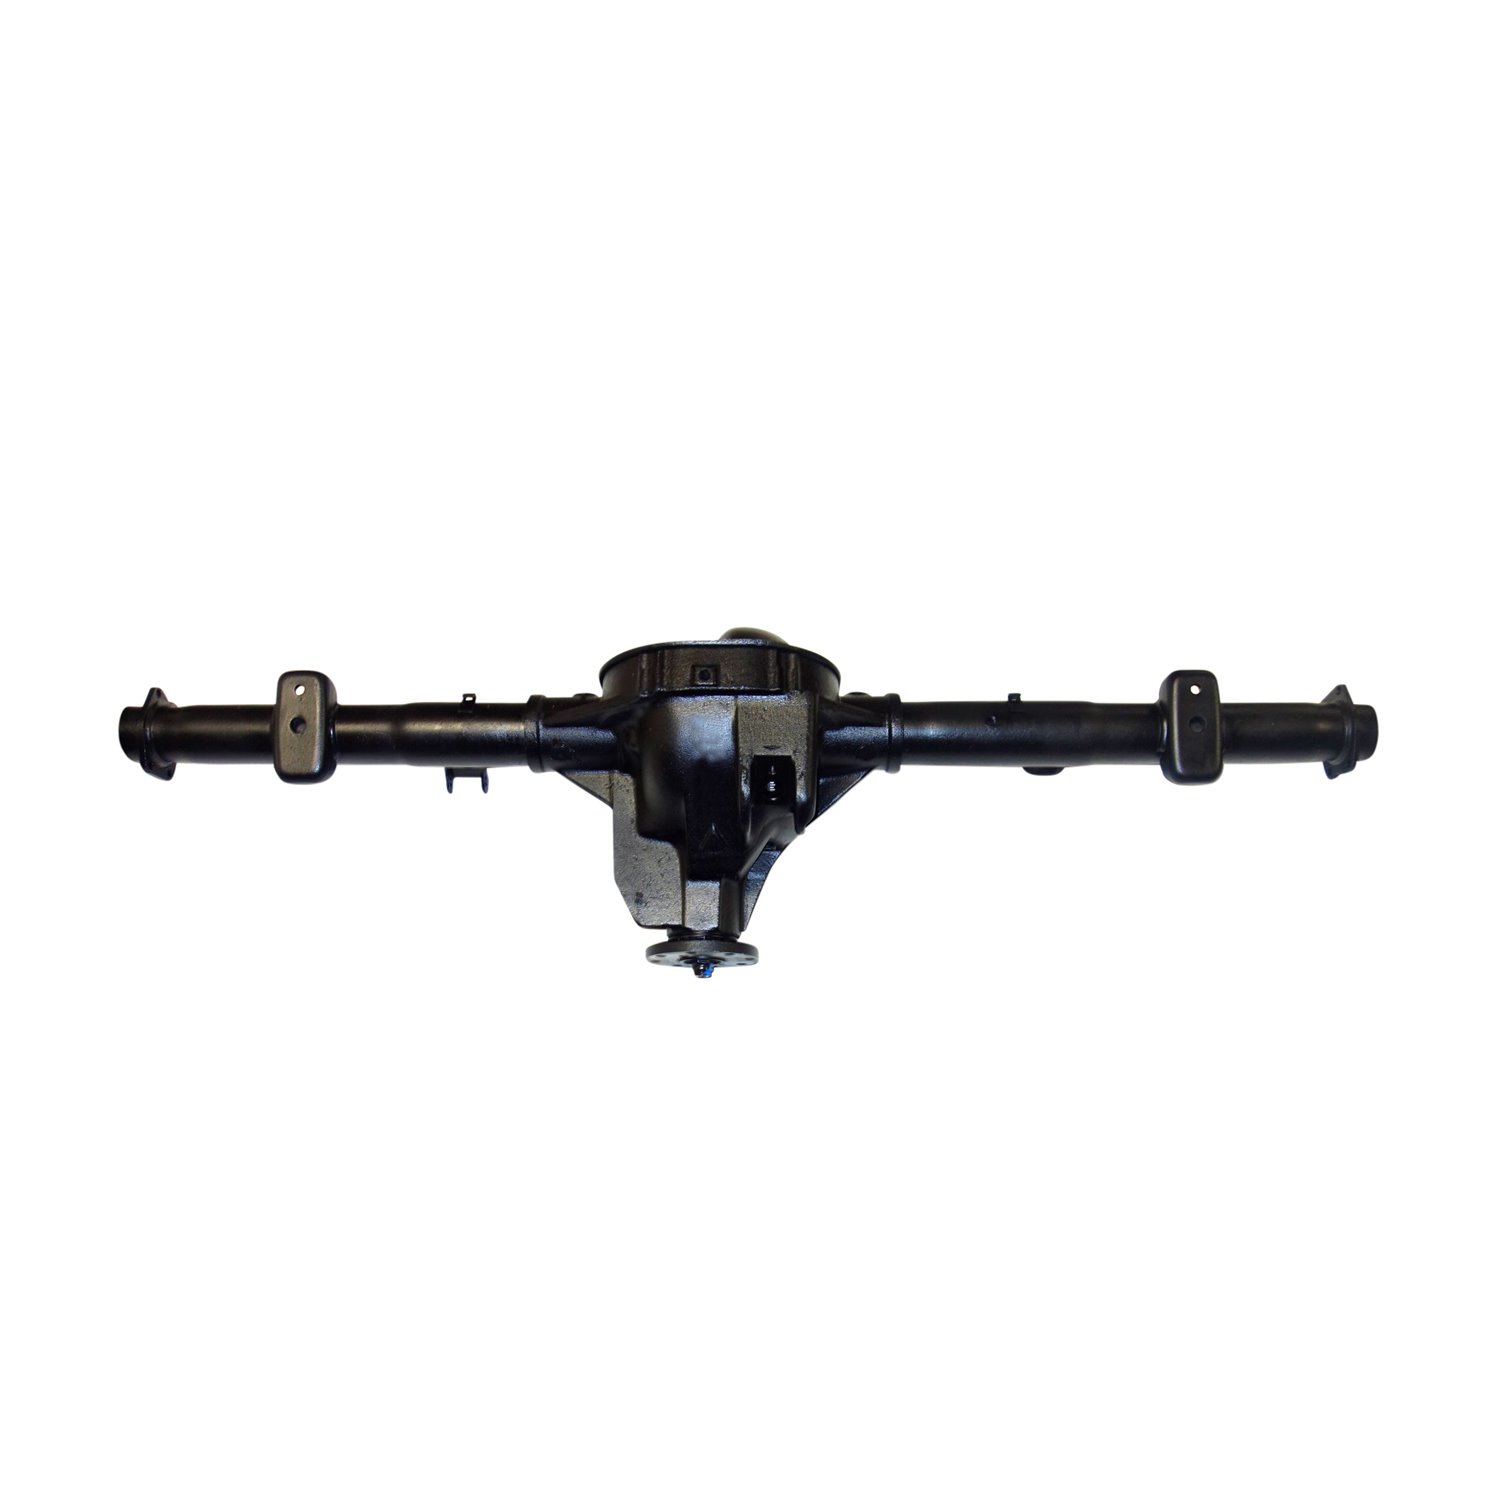 Remanufactured Complete Axle Assy for 8.8" 91-94 & Mazda Explorer & Navajo 3.73 with ABS